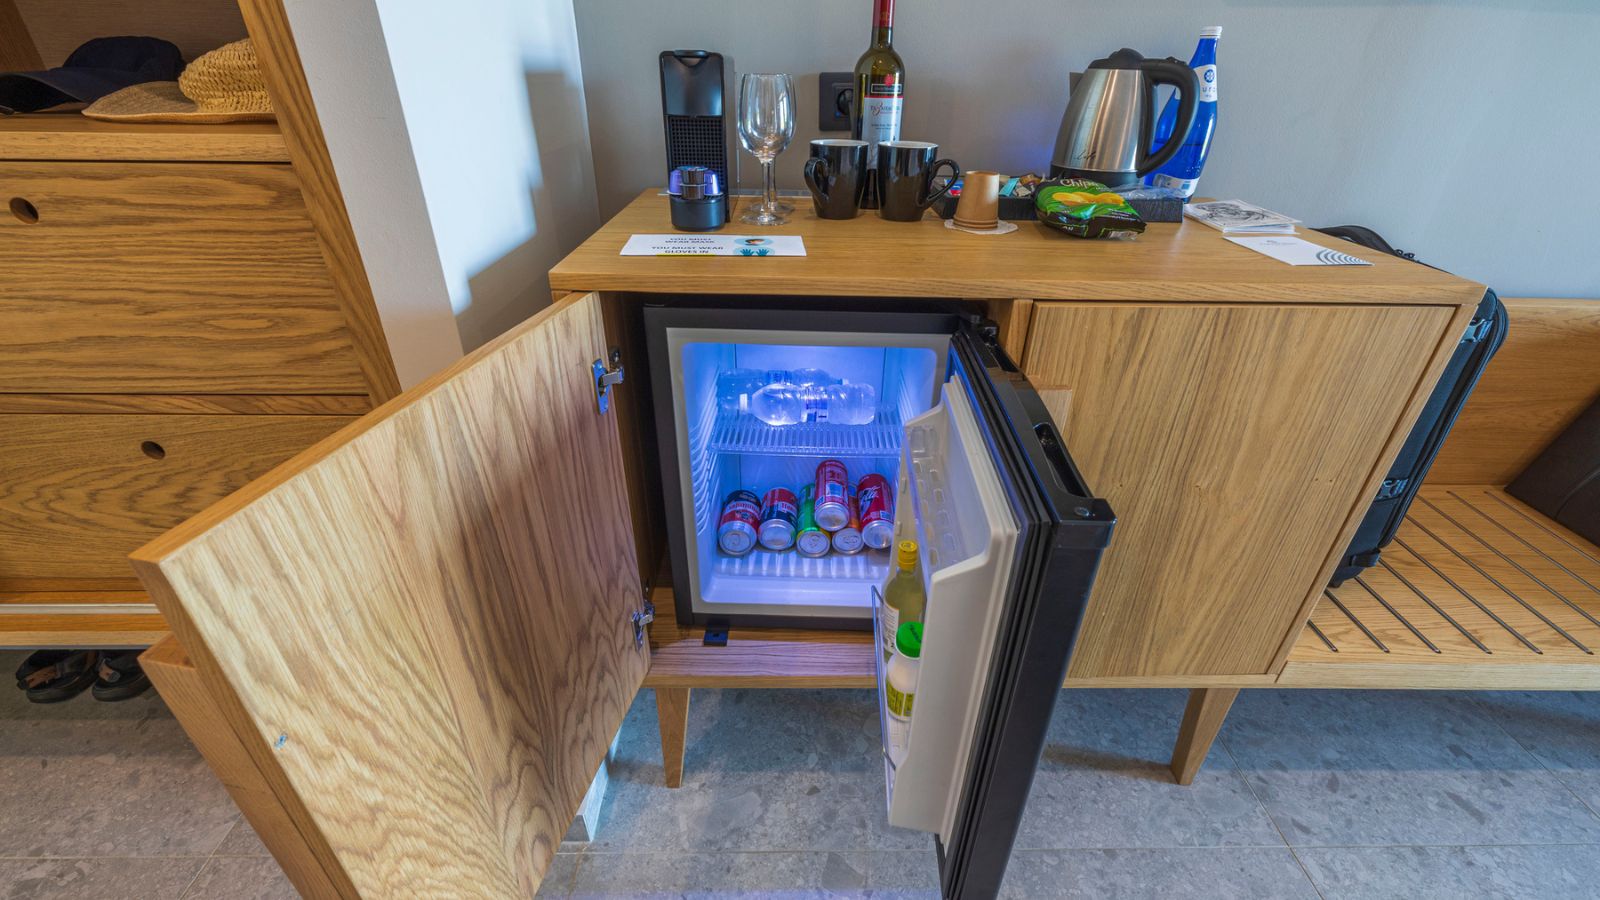 <p>Minibars in hotels tend to be significantly overpriced. It's recommended to avoid them altogether because you can typically find similar items at local stores for much cheaper prices. Save money by purchasing what you need from nearby stores rather than indulging in the convenience of the minibar.</p>